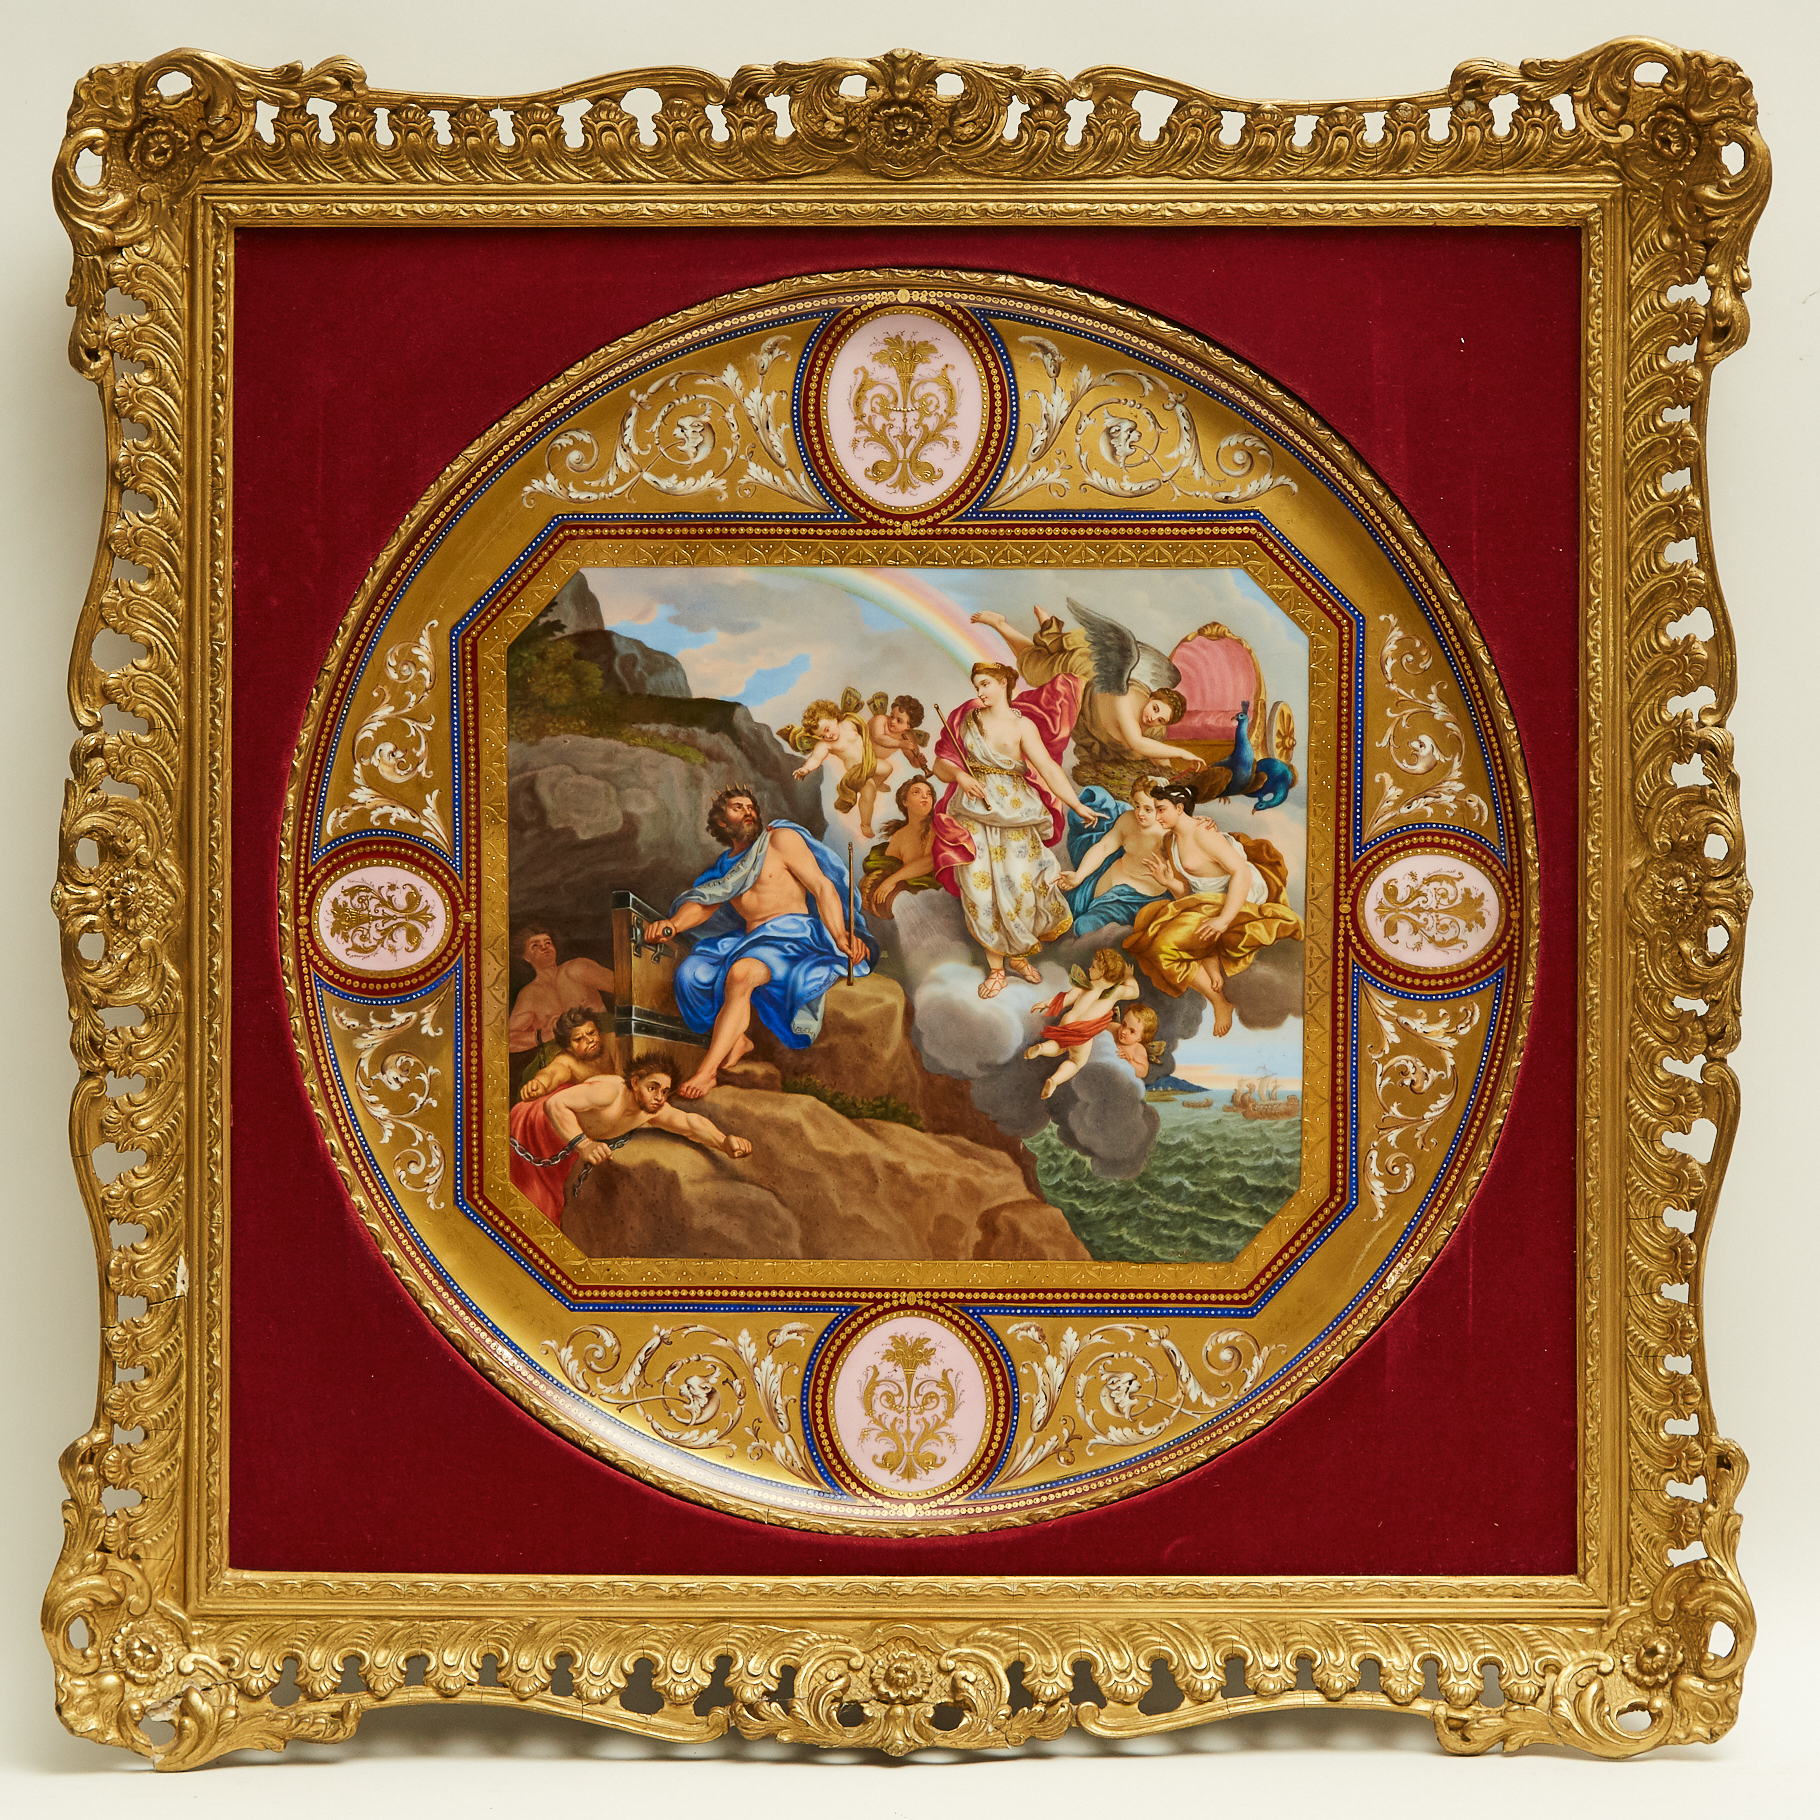 'Vienna' Circular Plaque of 'Air' (Juno Orders Aeolus to Release the Winds), after Charles Dupuis, late 19th/early 20th century